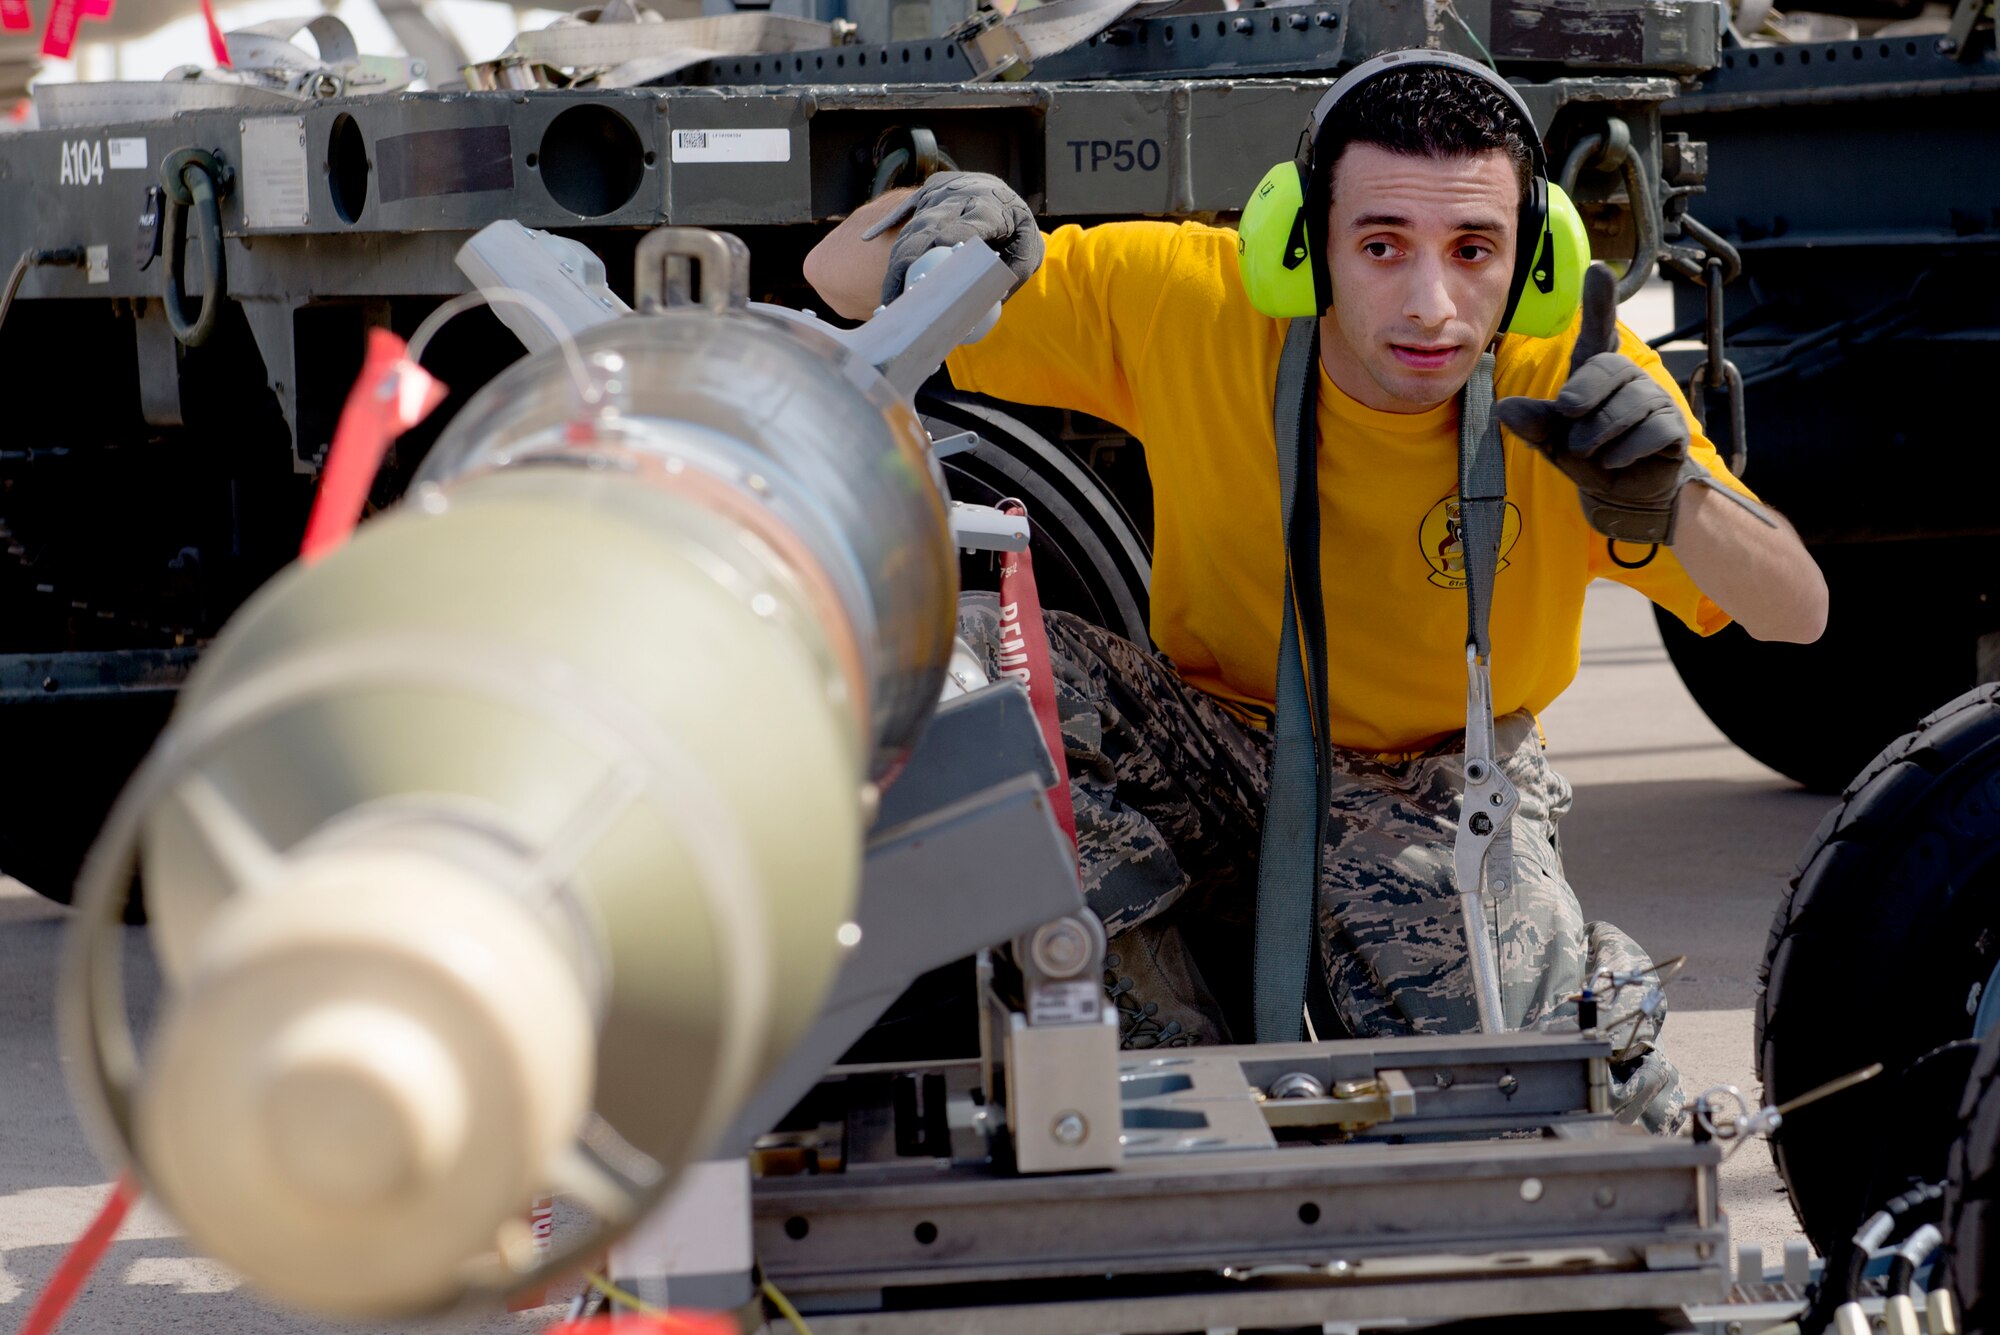 Staff Sgt. Luis Santiago, 61st Aircraft Maintenance Unit weapons load crew lead, prepares an inert bomb for loading during the 2018 1st Quarter Load Crew Competition at Luke Air Force Base, Ariz., April 6. The competition saw load crew teams from the 61st, 62nd, 63rd, 309th, 310th, and 425th AMUs compete to load a mock mission set of ordnance onto F-35 Lightning IIs and F-16 Fighting Falcons in the fastest time. (U.S. Air Force photo by Senior Airman Ridge Shan)